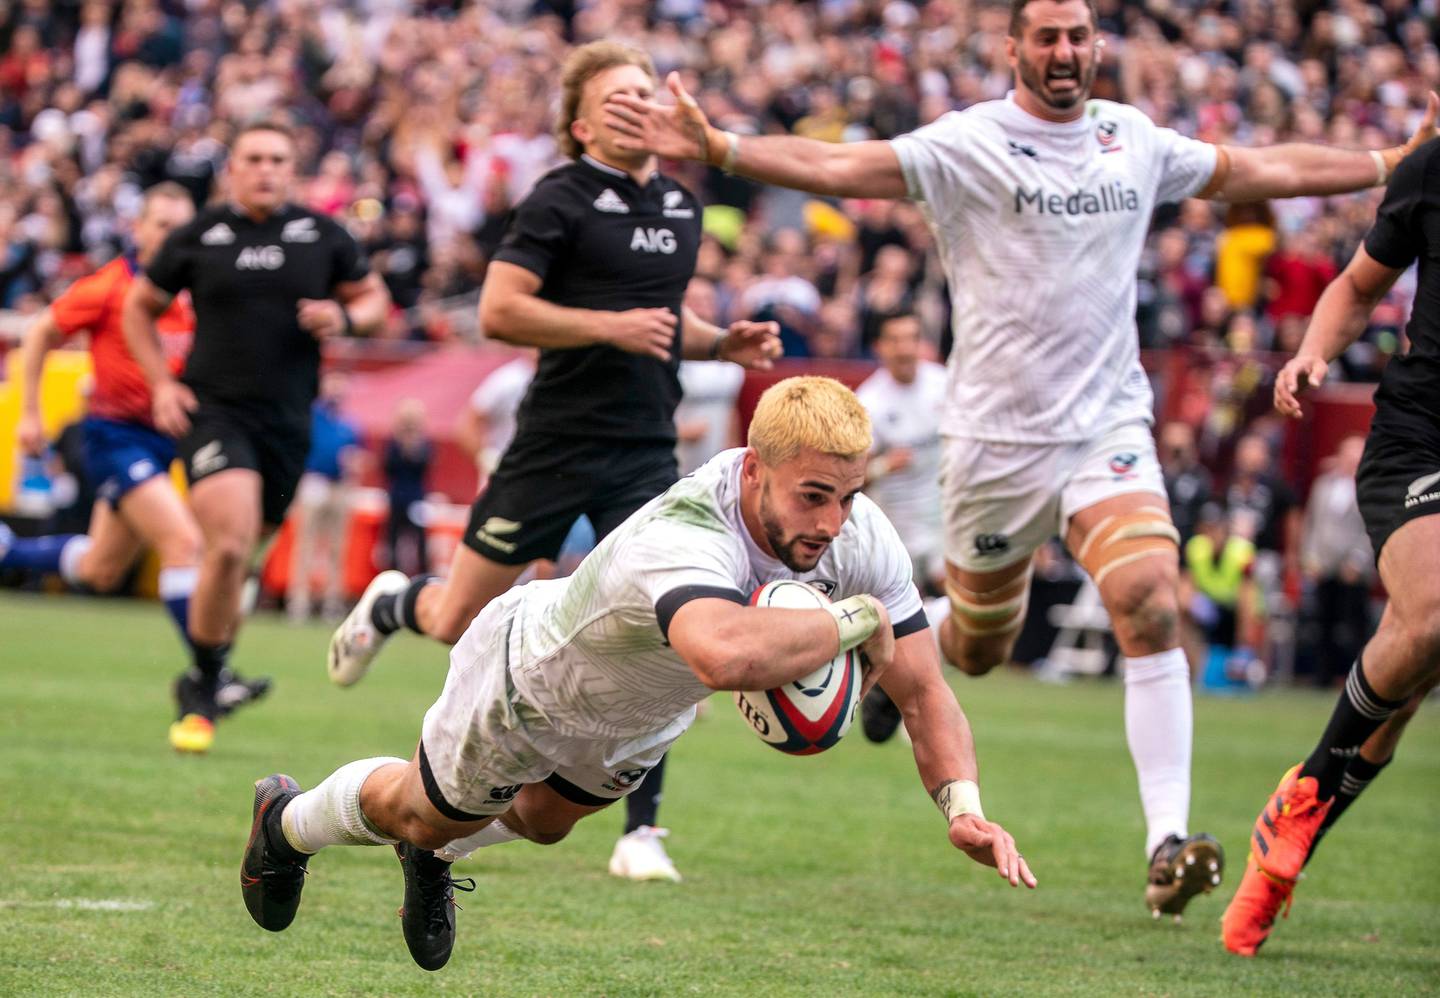 Nate Augspurger scores a try for the home side during an international rugby match between the USA Eagles and the All Blacks in Washington DC.  Athletic